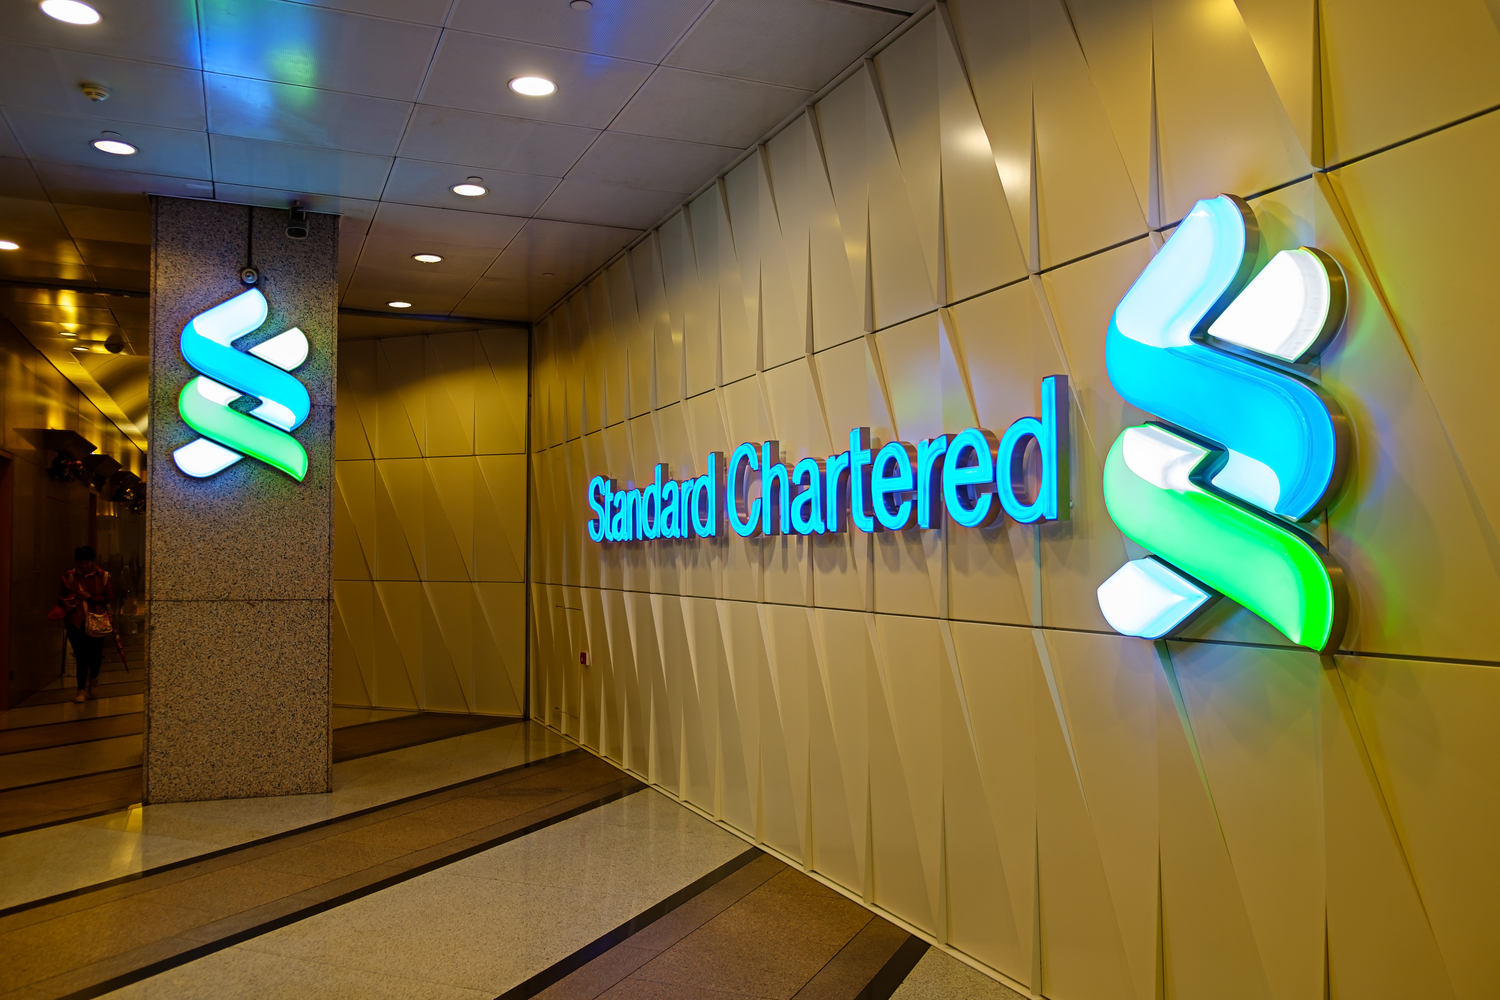 "My dear" of Standard Chartered to fulfill its legal status with the UK FCA